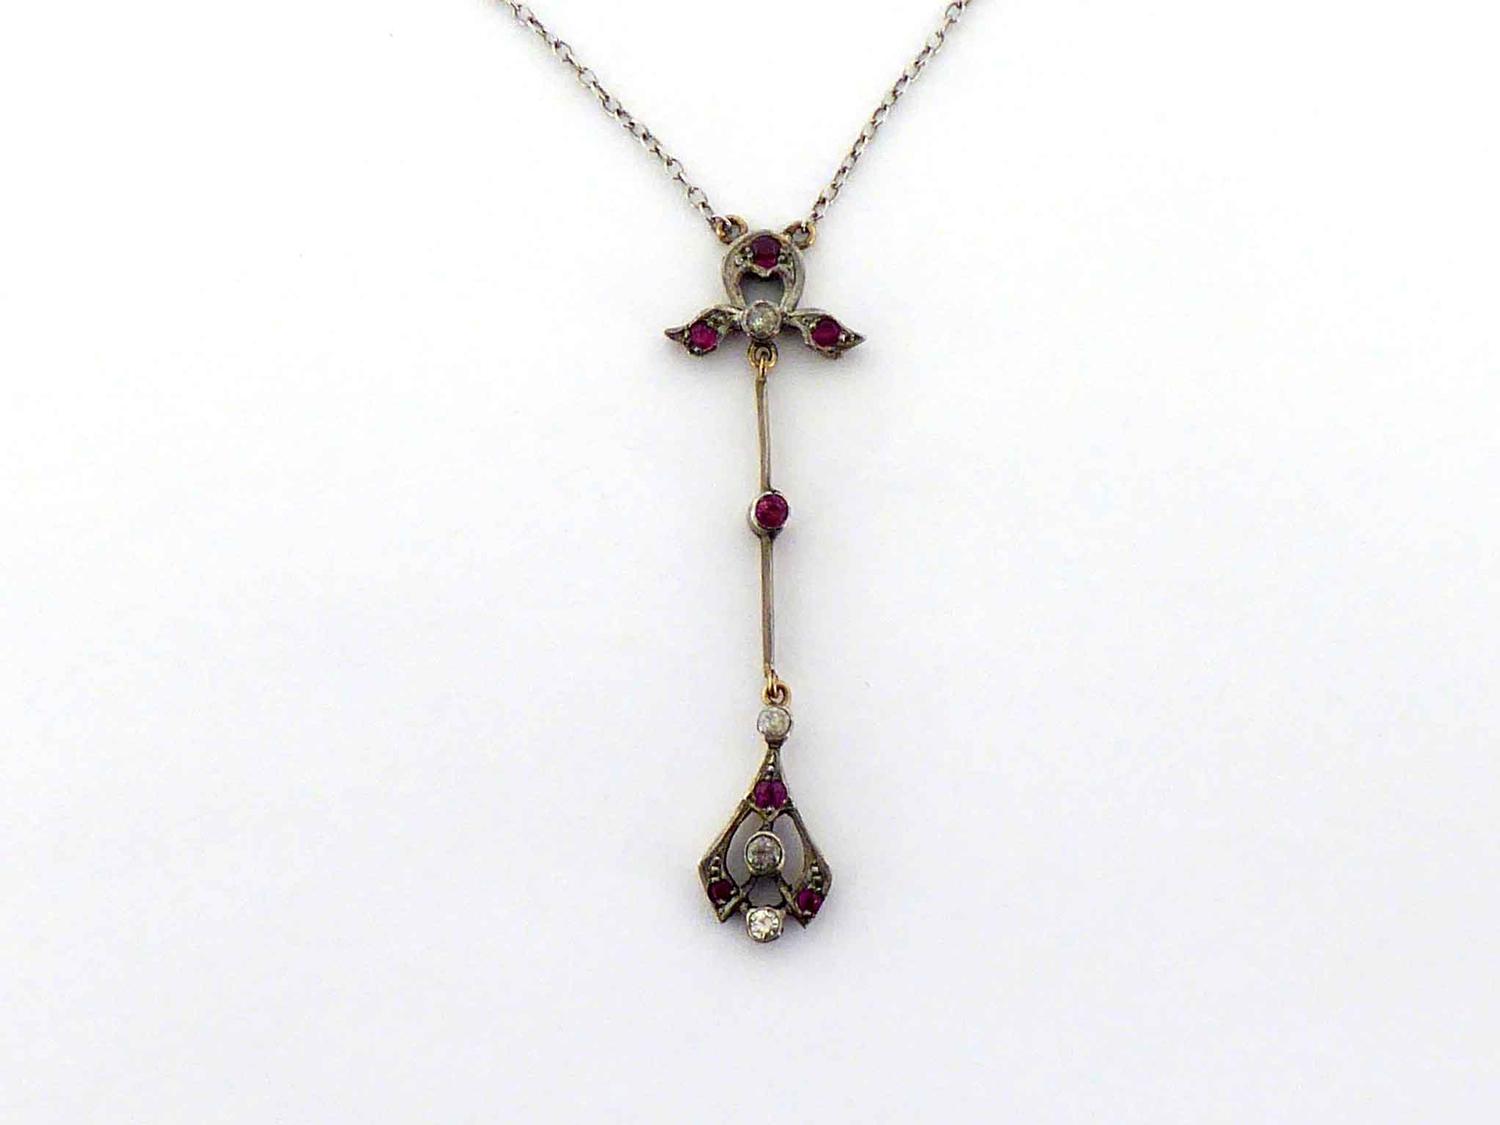 An early 20th century diamond and ruby pendant necklace, set overall with alternate brilliants and